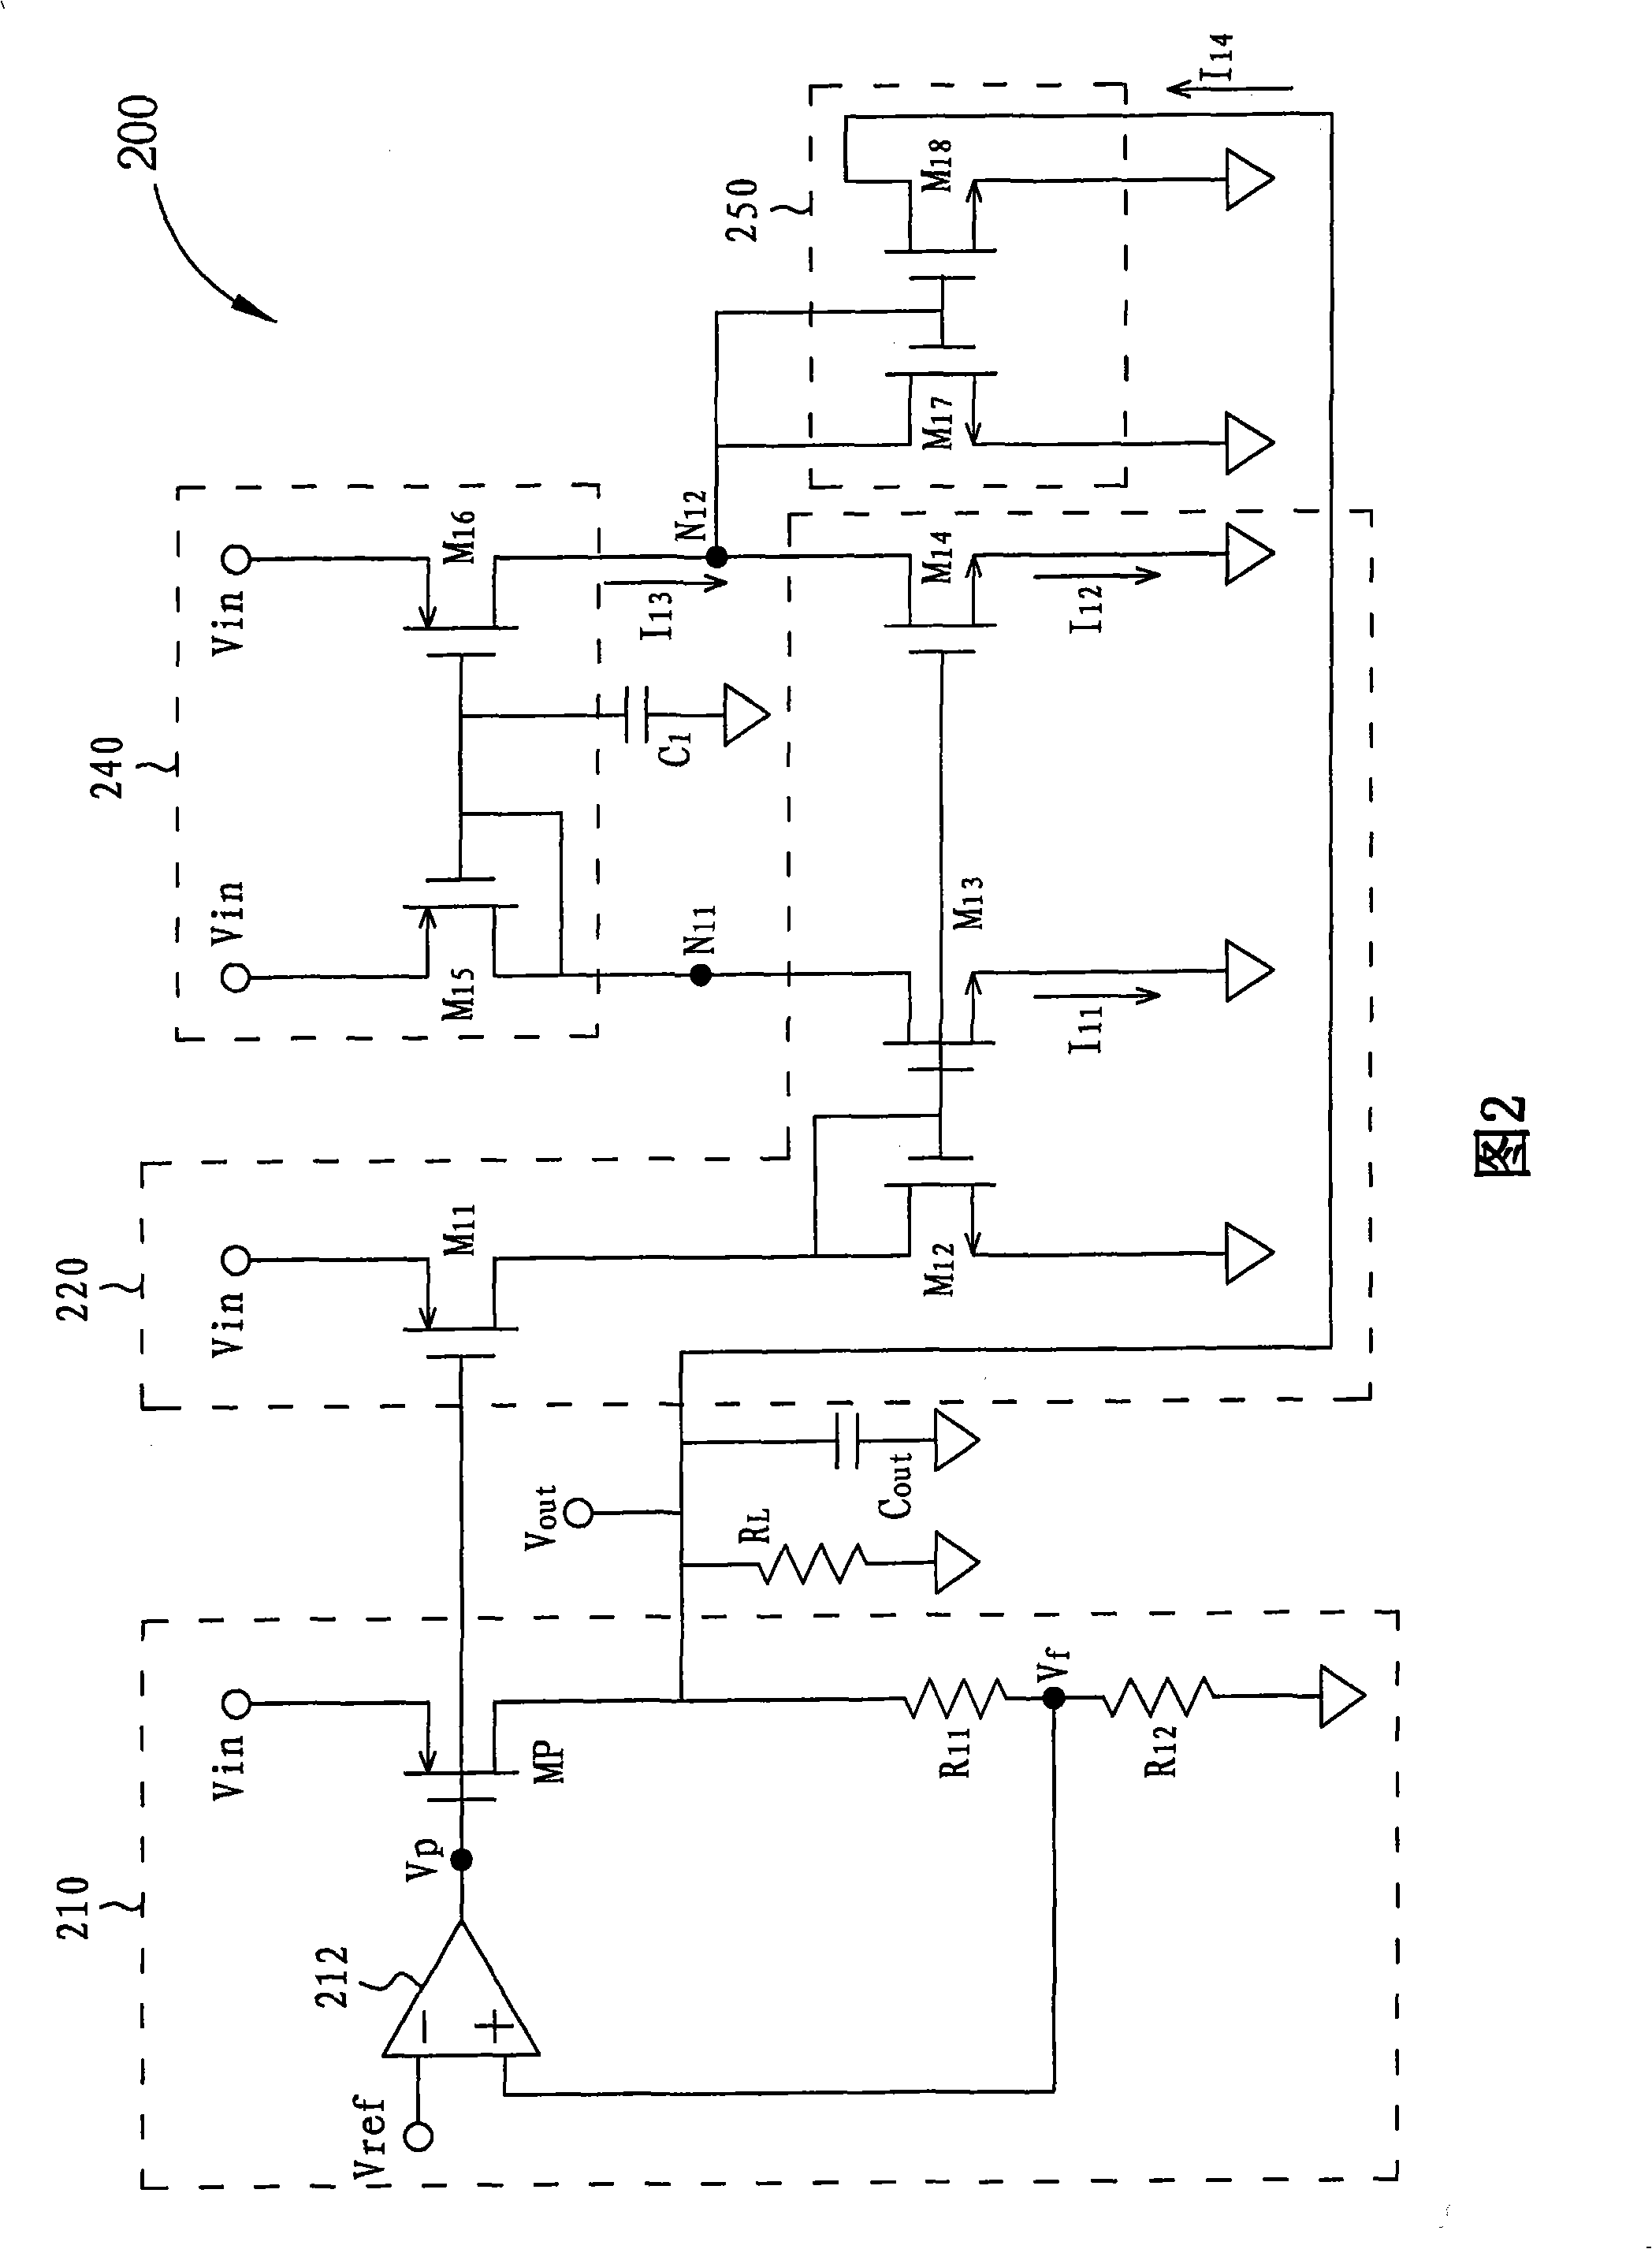 Voltage regulating circuit and method for providing regulated output voltage